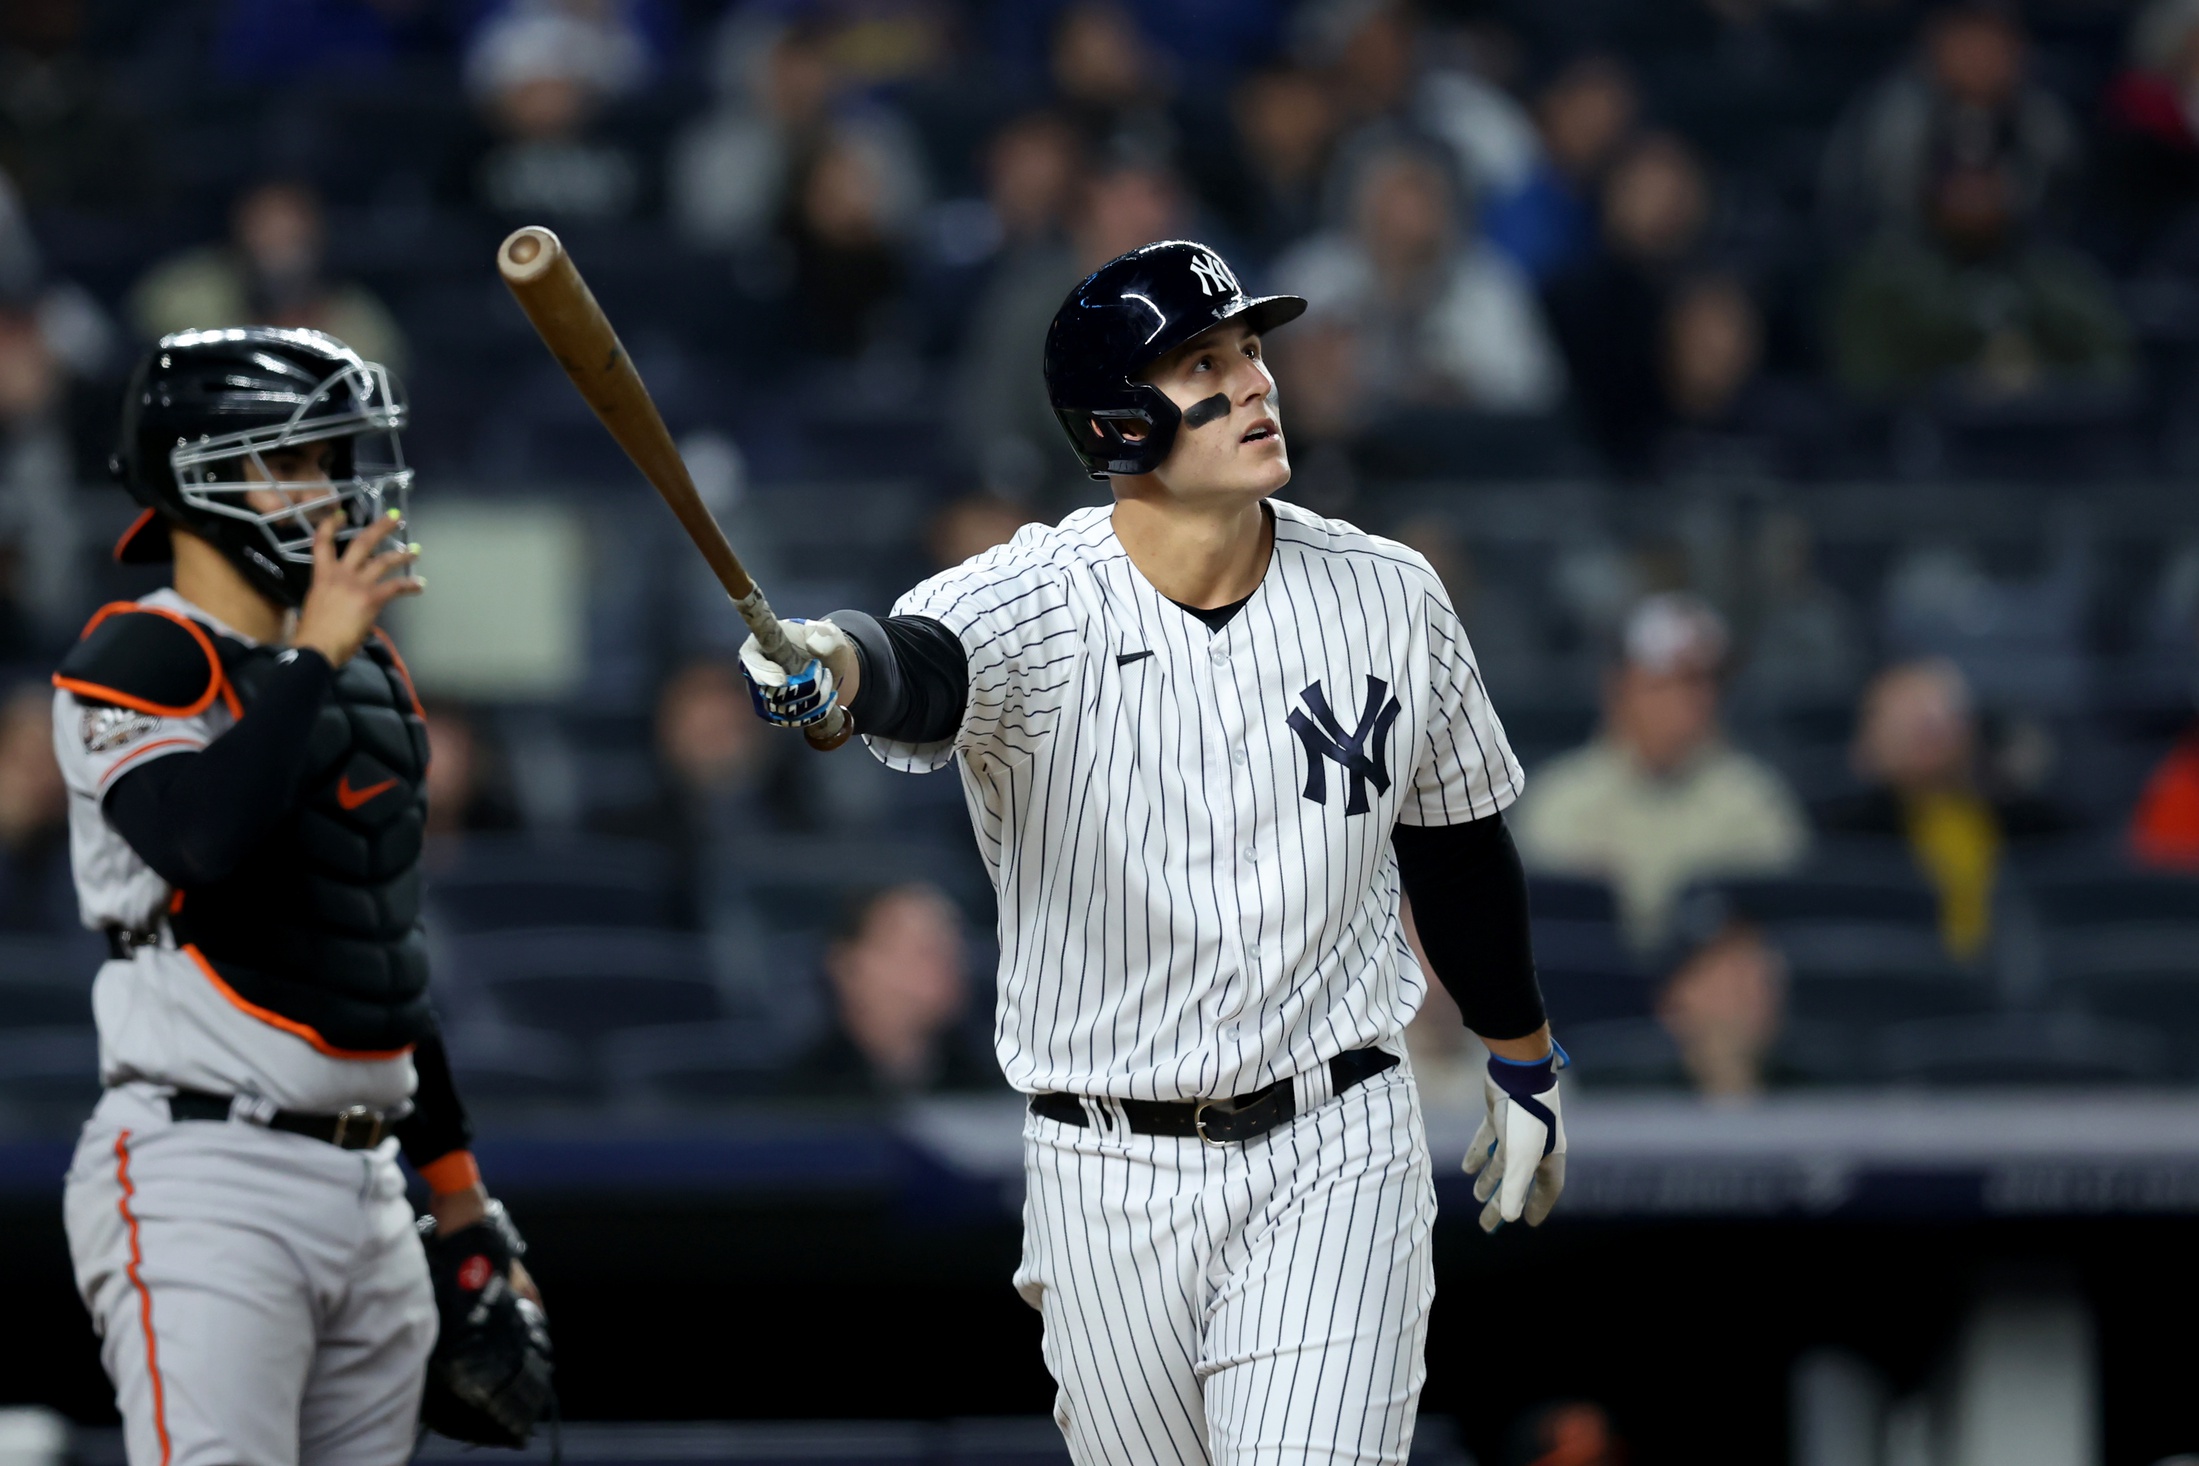 Anthony Rizzo blasts three homers as the Yankees down the Orioles